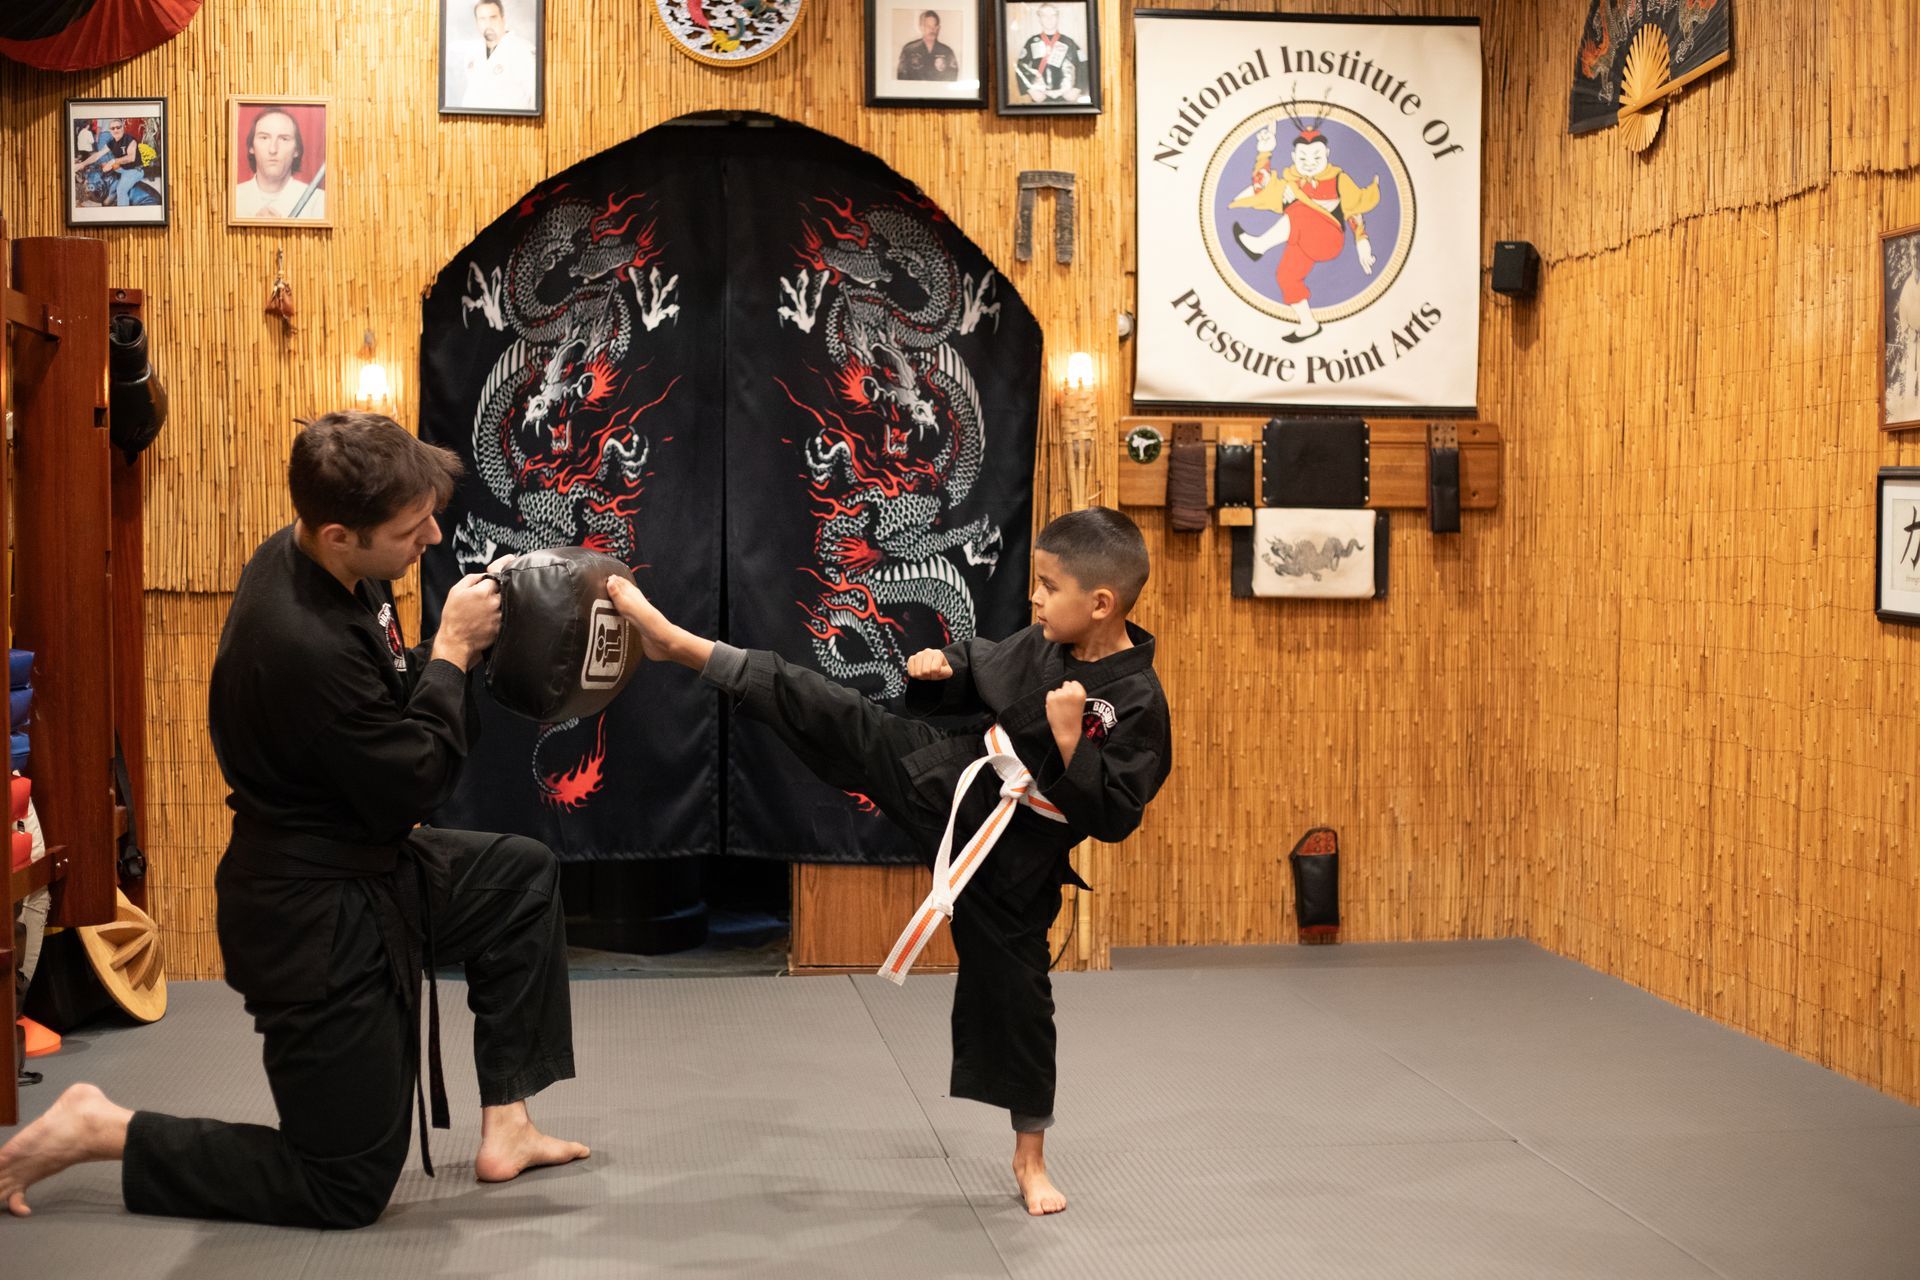 A man and a boy are practicing martial arts in a gym.